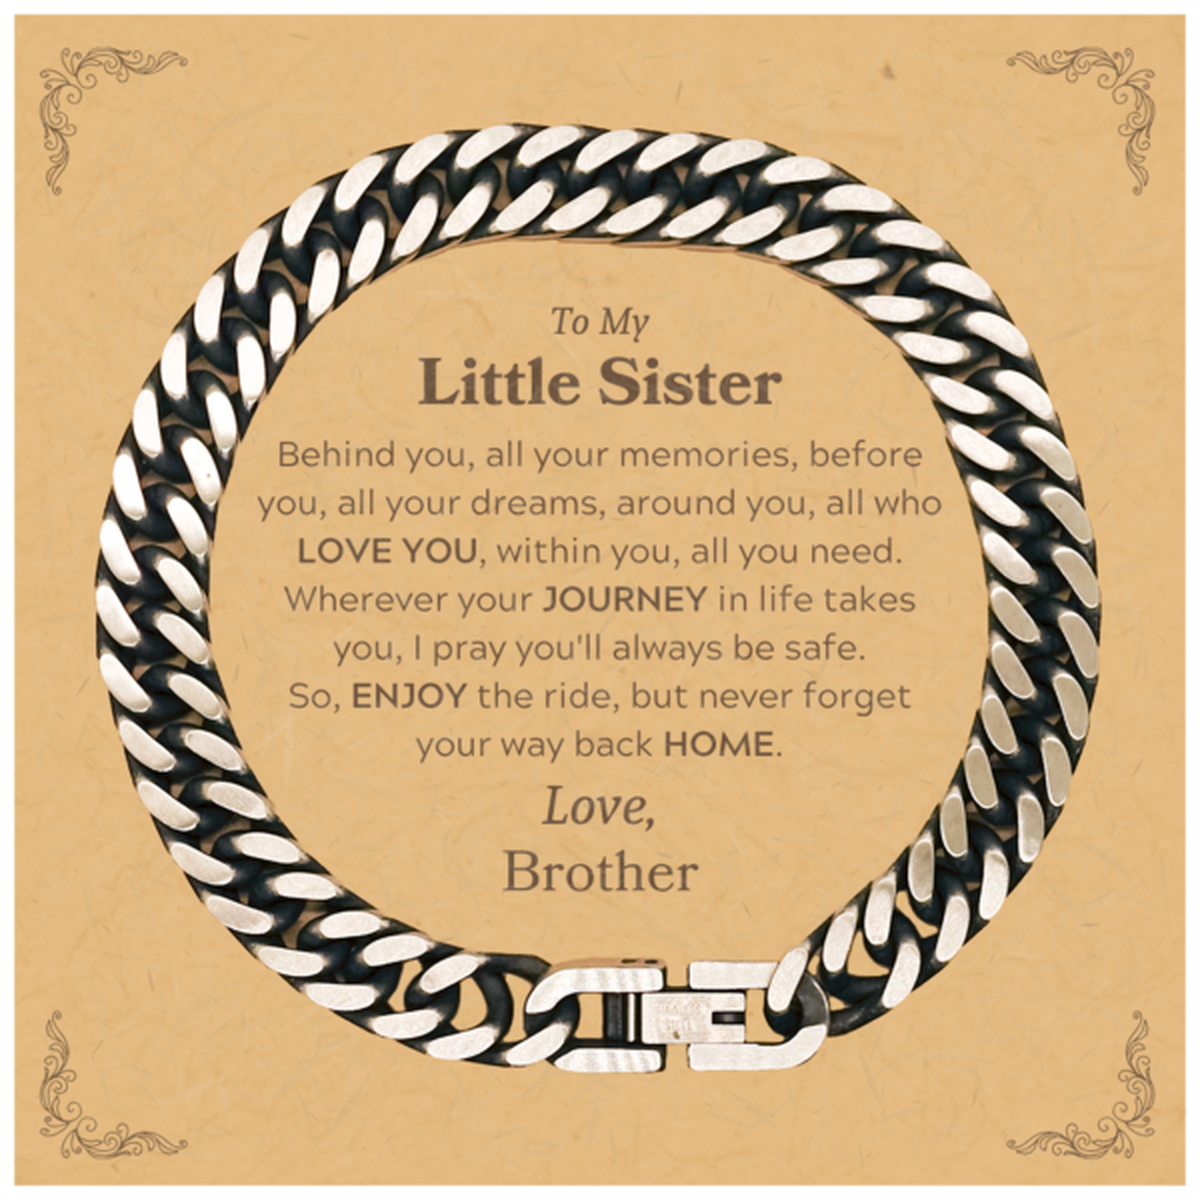 To My Little Sister Graduation Gifts from Brother, Little Sister Cuban Link Chain Bracelet Christmas Birthday Gifts for Little Sister Behind you, all your memories, before you, all your dreams. Love, Brother